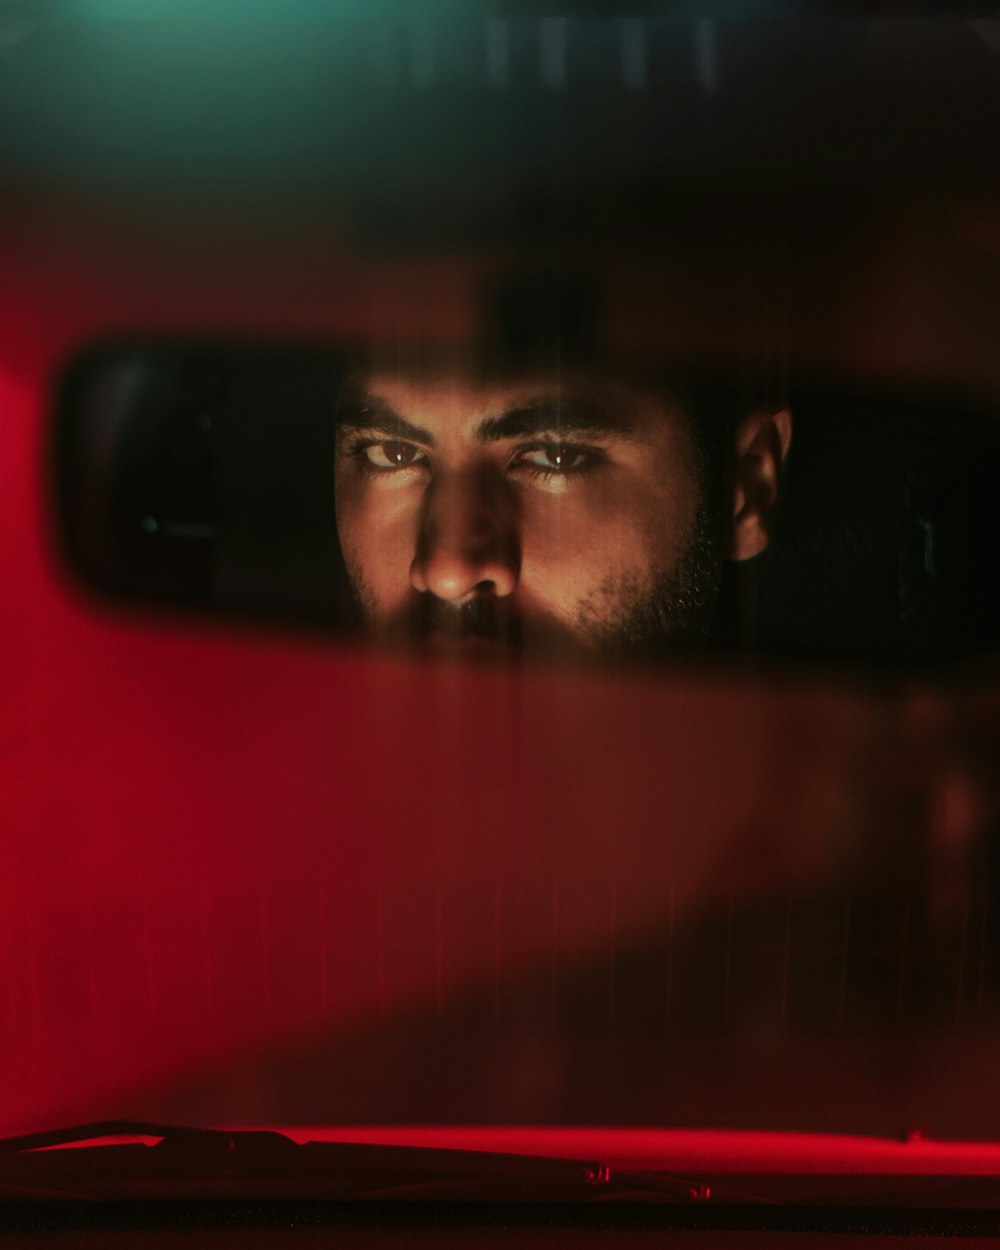 a man's reflection in a rear view mirror